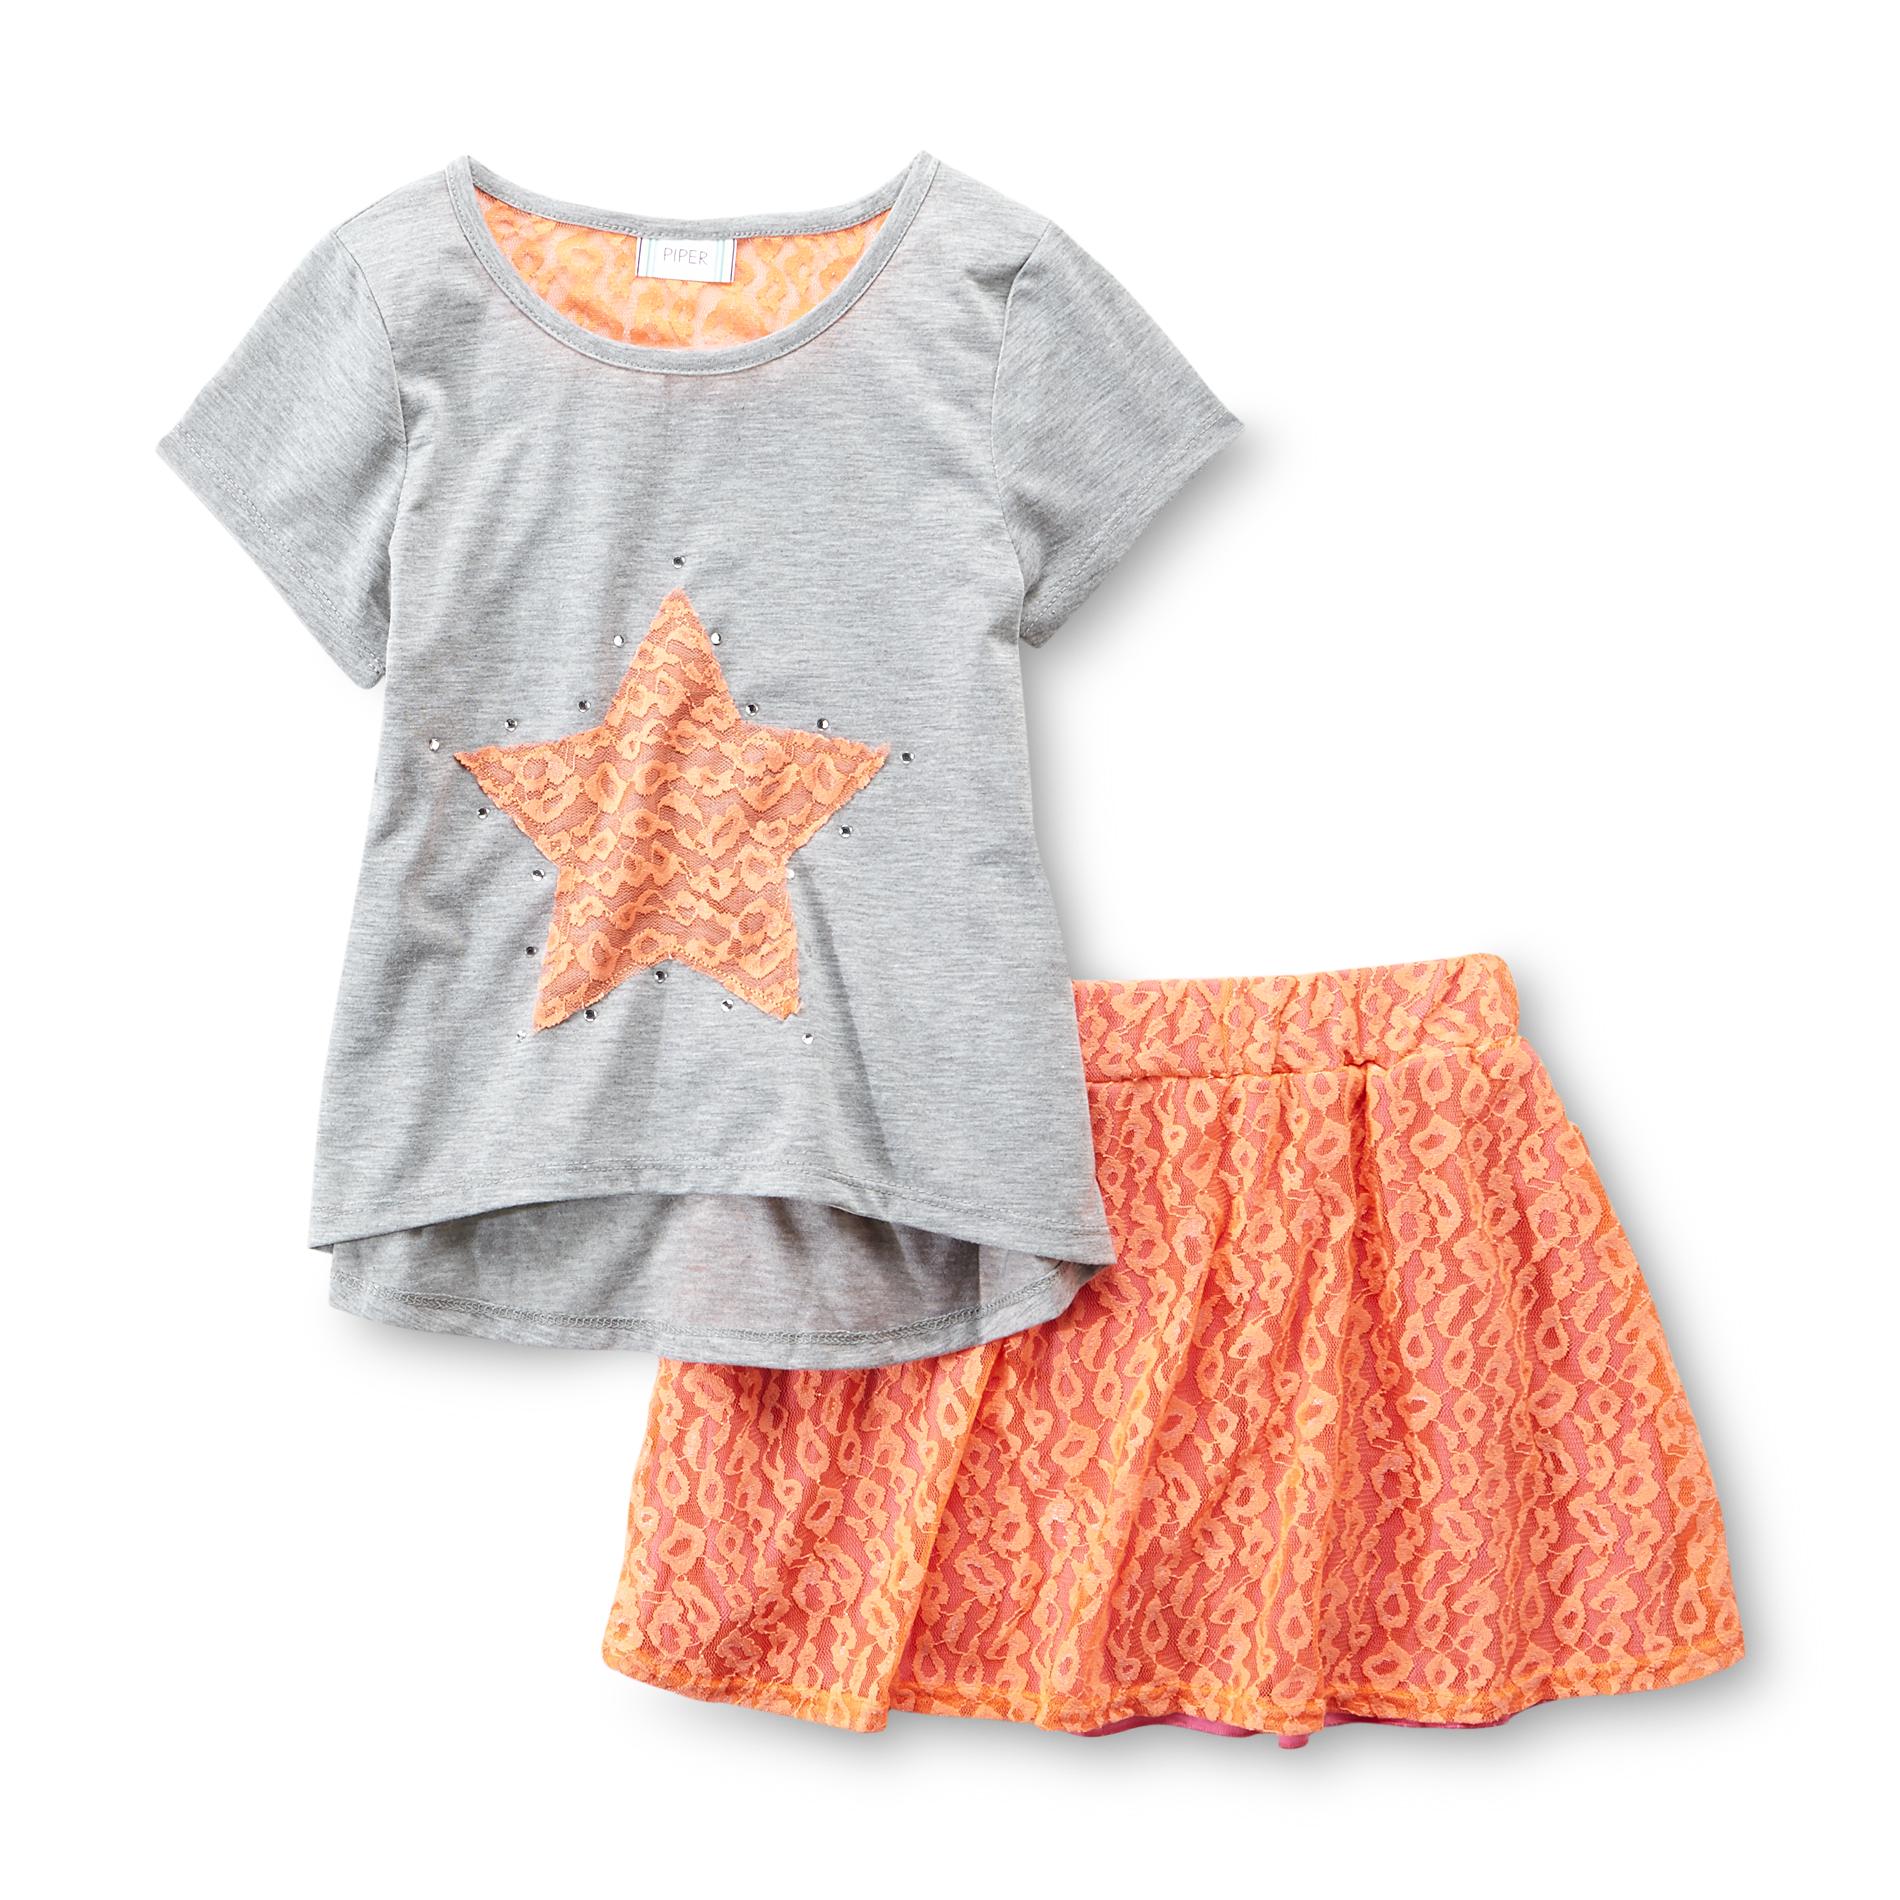 Piper Girl's Top & Scooter Skirt - Star